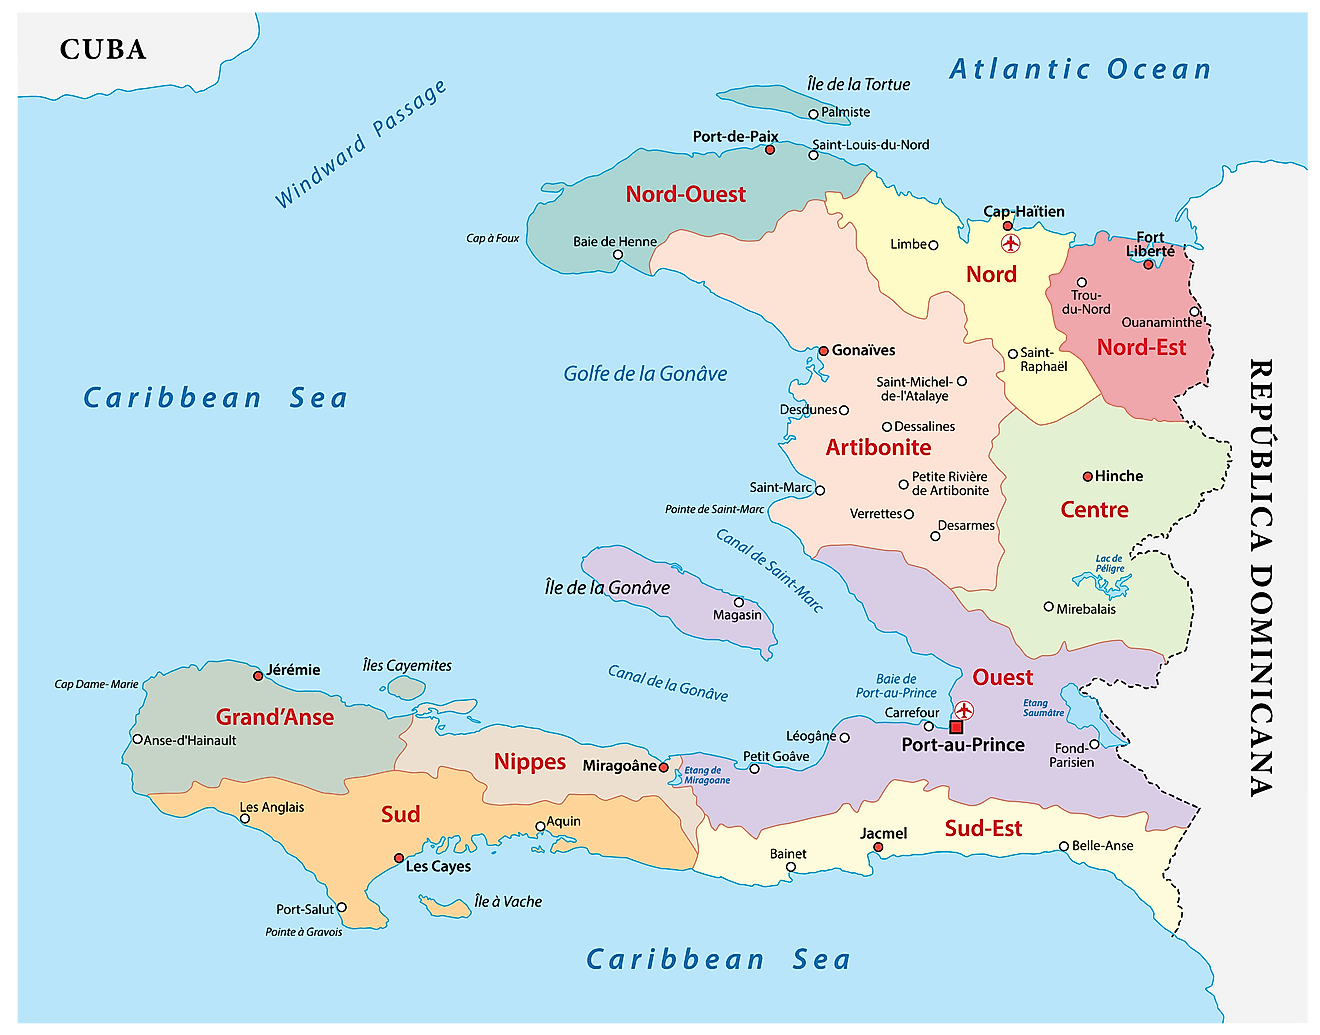 Political Map of Haiti showing its 10 departments and the capital city of Port-au-Prince.